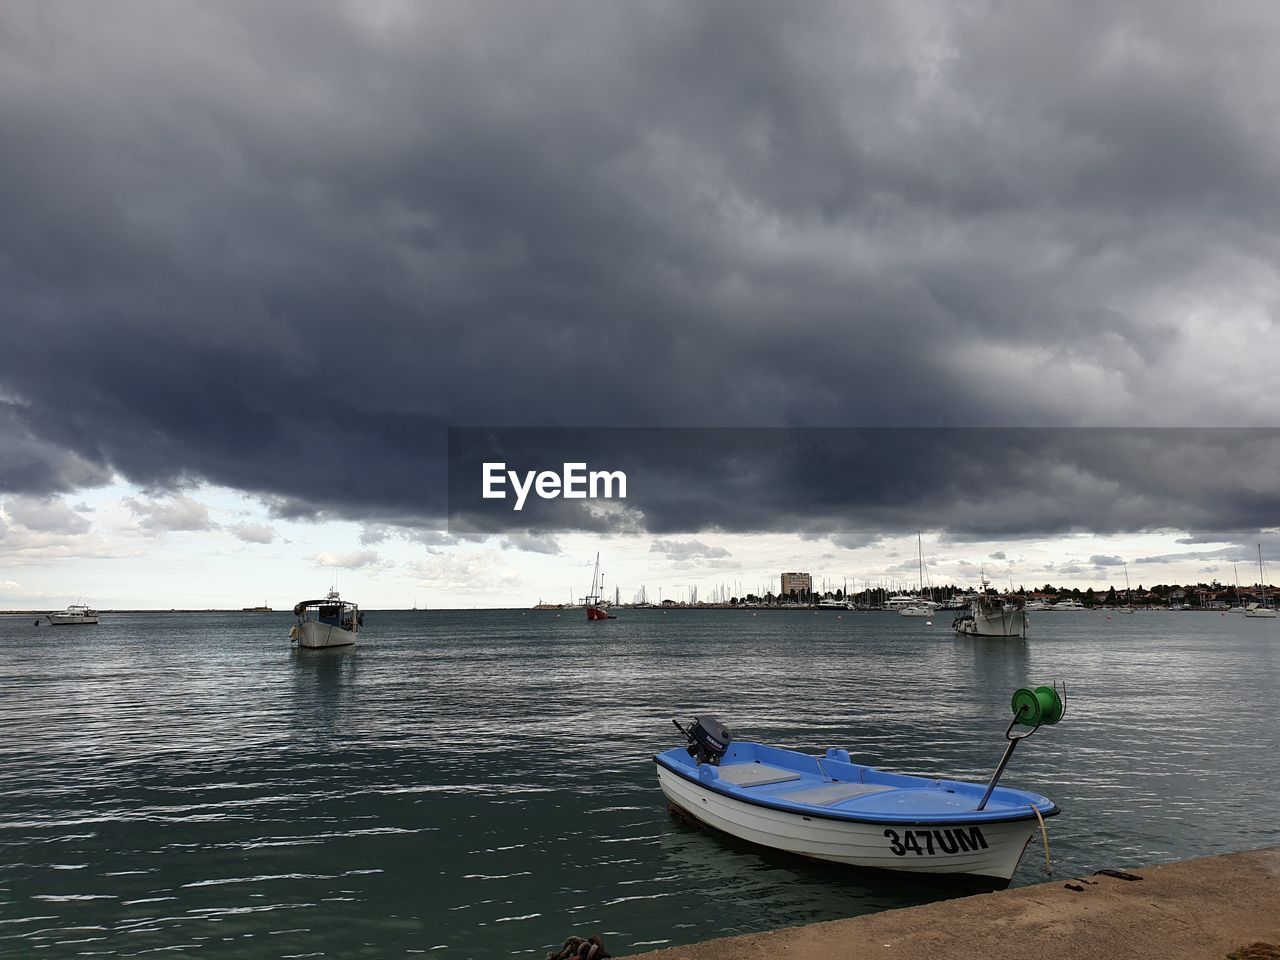 BOATS MOORED ON SEA AGAINST STORM CLOUDS